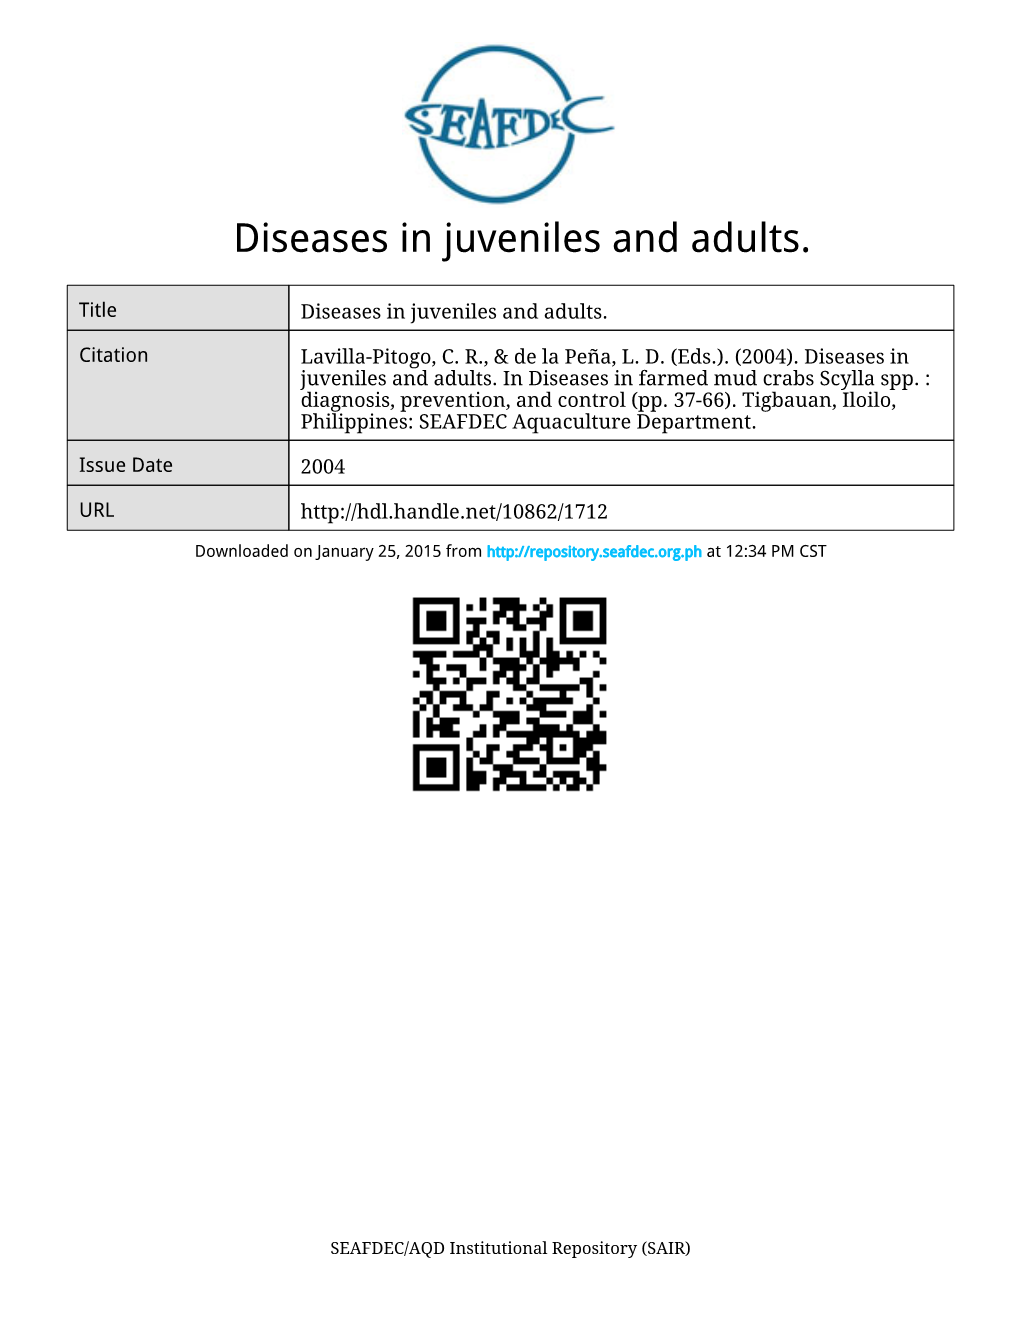 Diseases in Farmed Mud Crabs Scylla Spp. : Diagnosis, Prevention, and Control (Pp